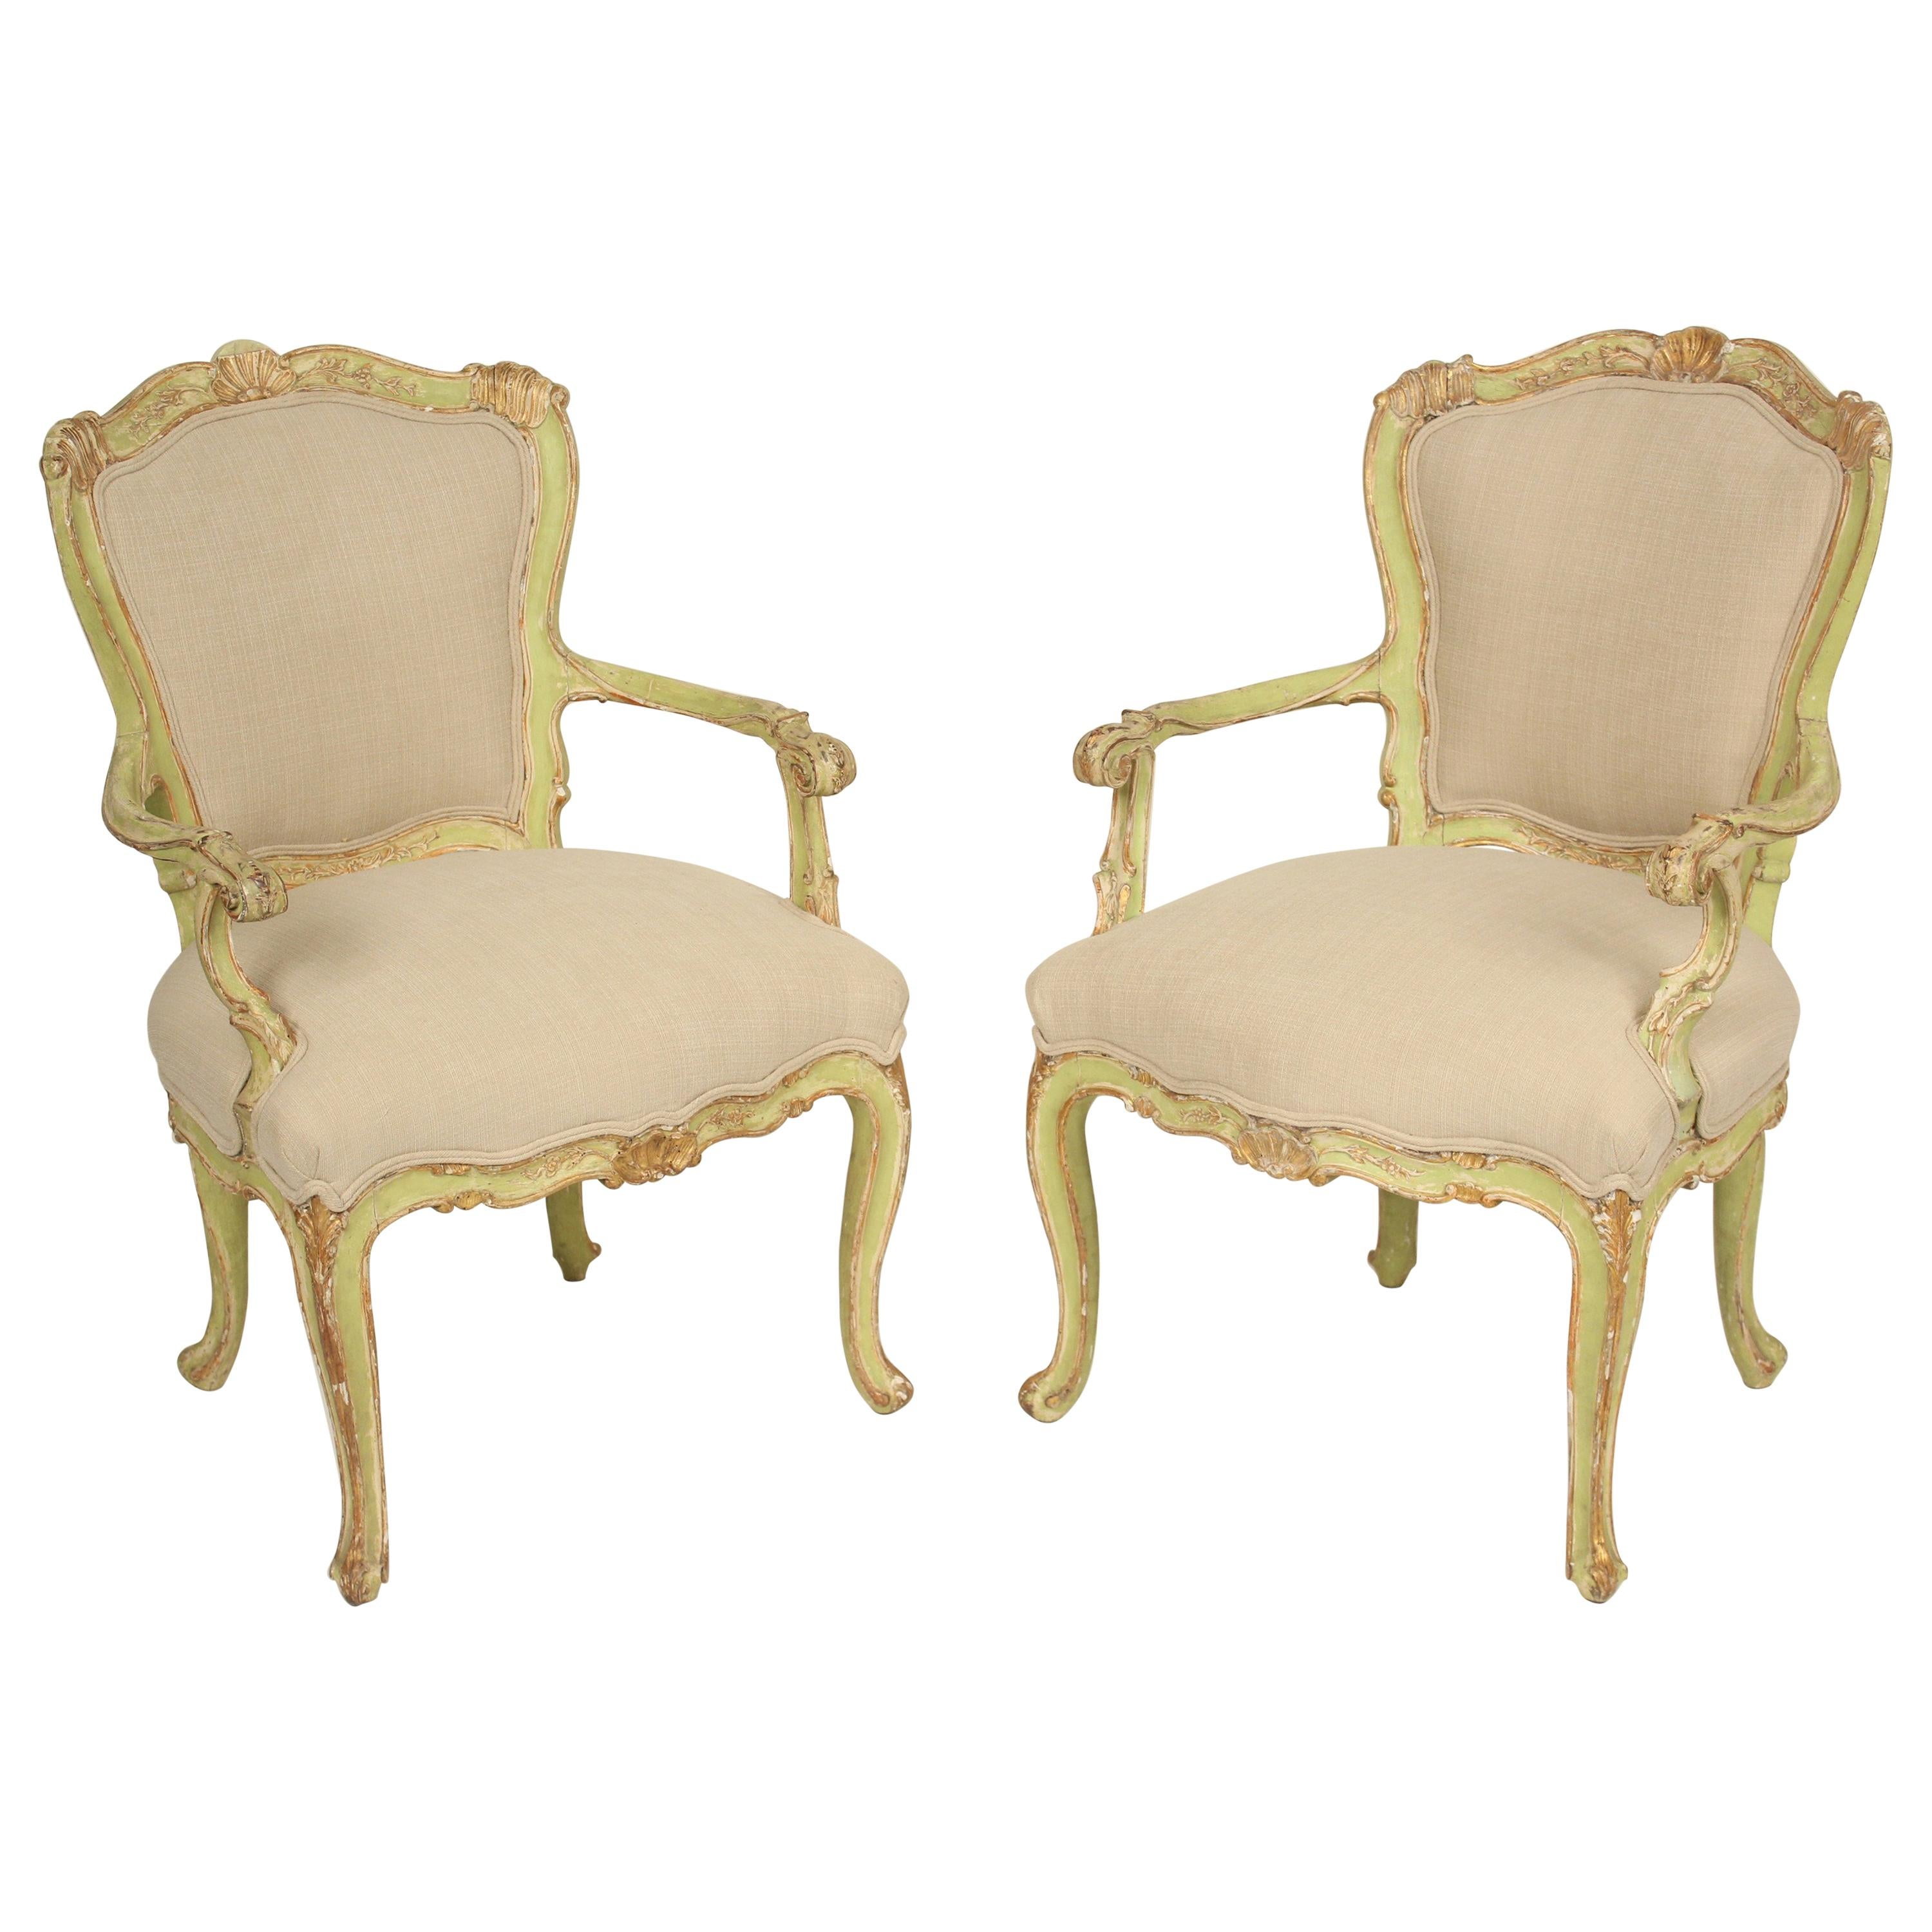 Pair of Antique Louis XV Style Painted Armchairs